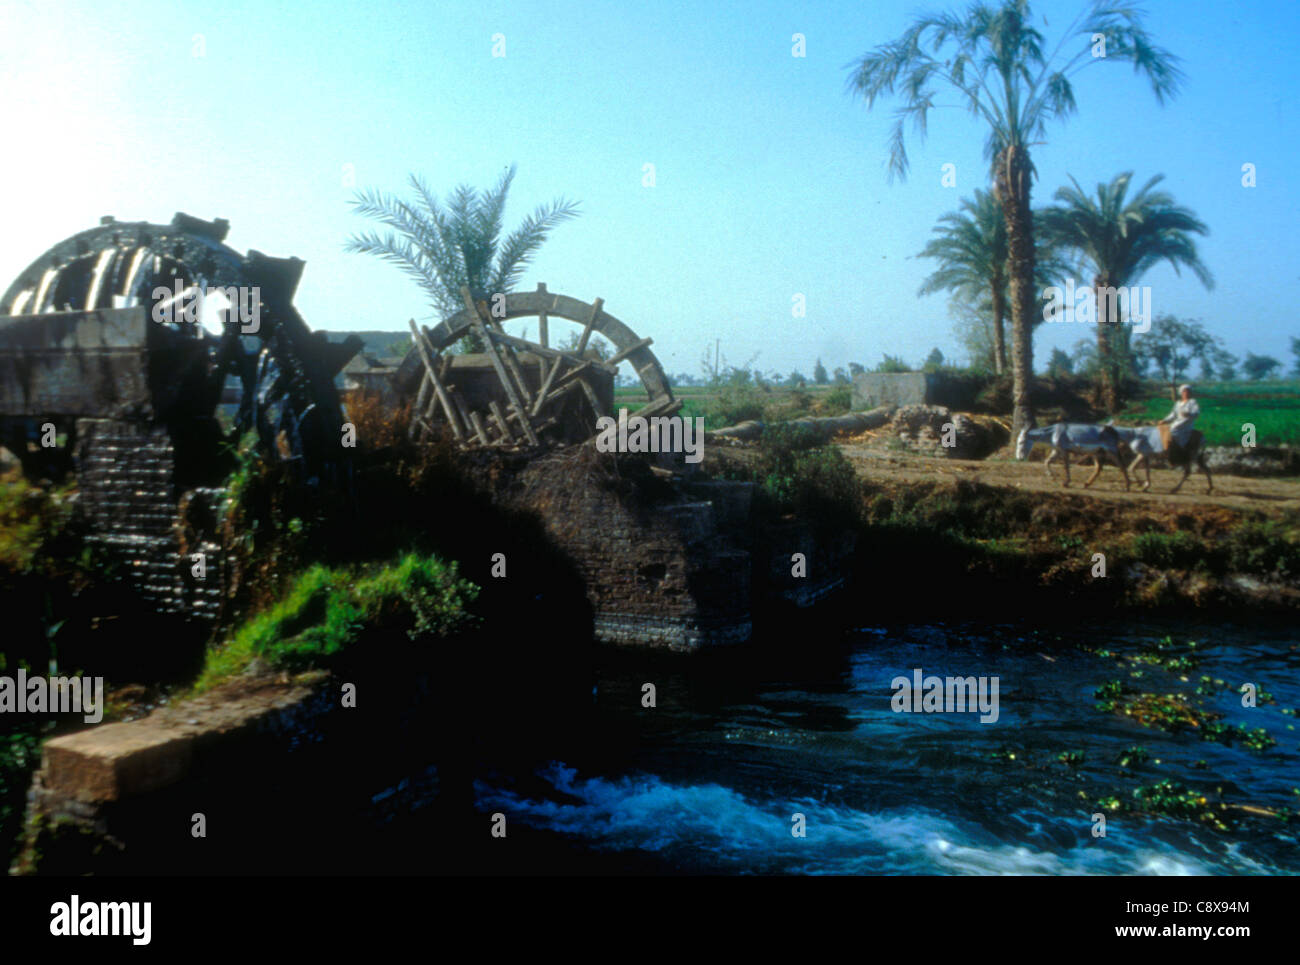 Traditional norias or water wheel irrigating farmland in the Fayyoum Oasis in Egypt Stock Photo